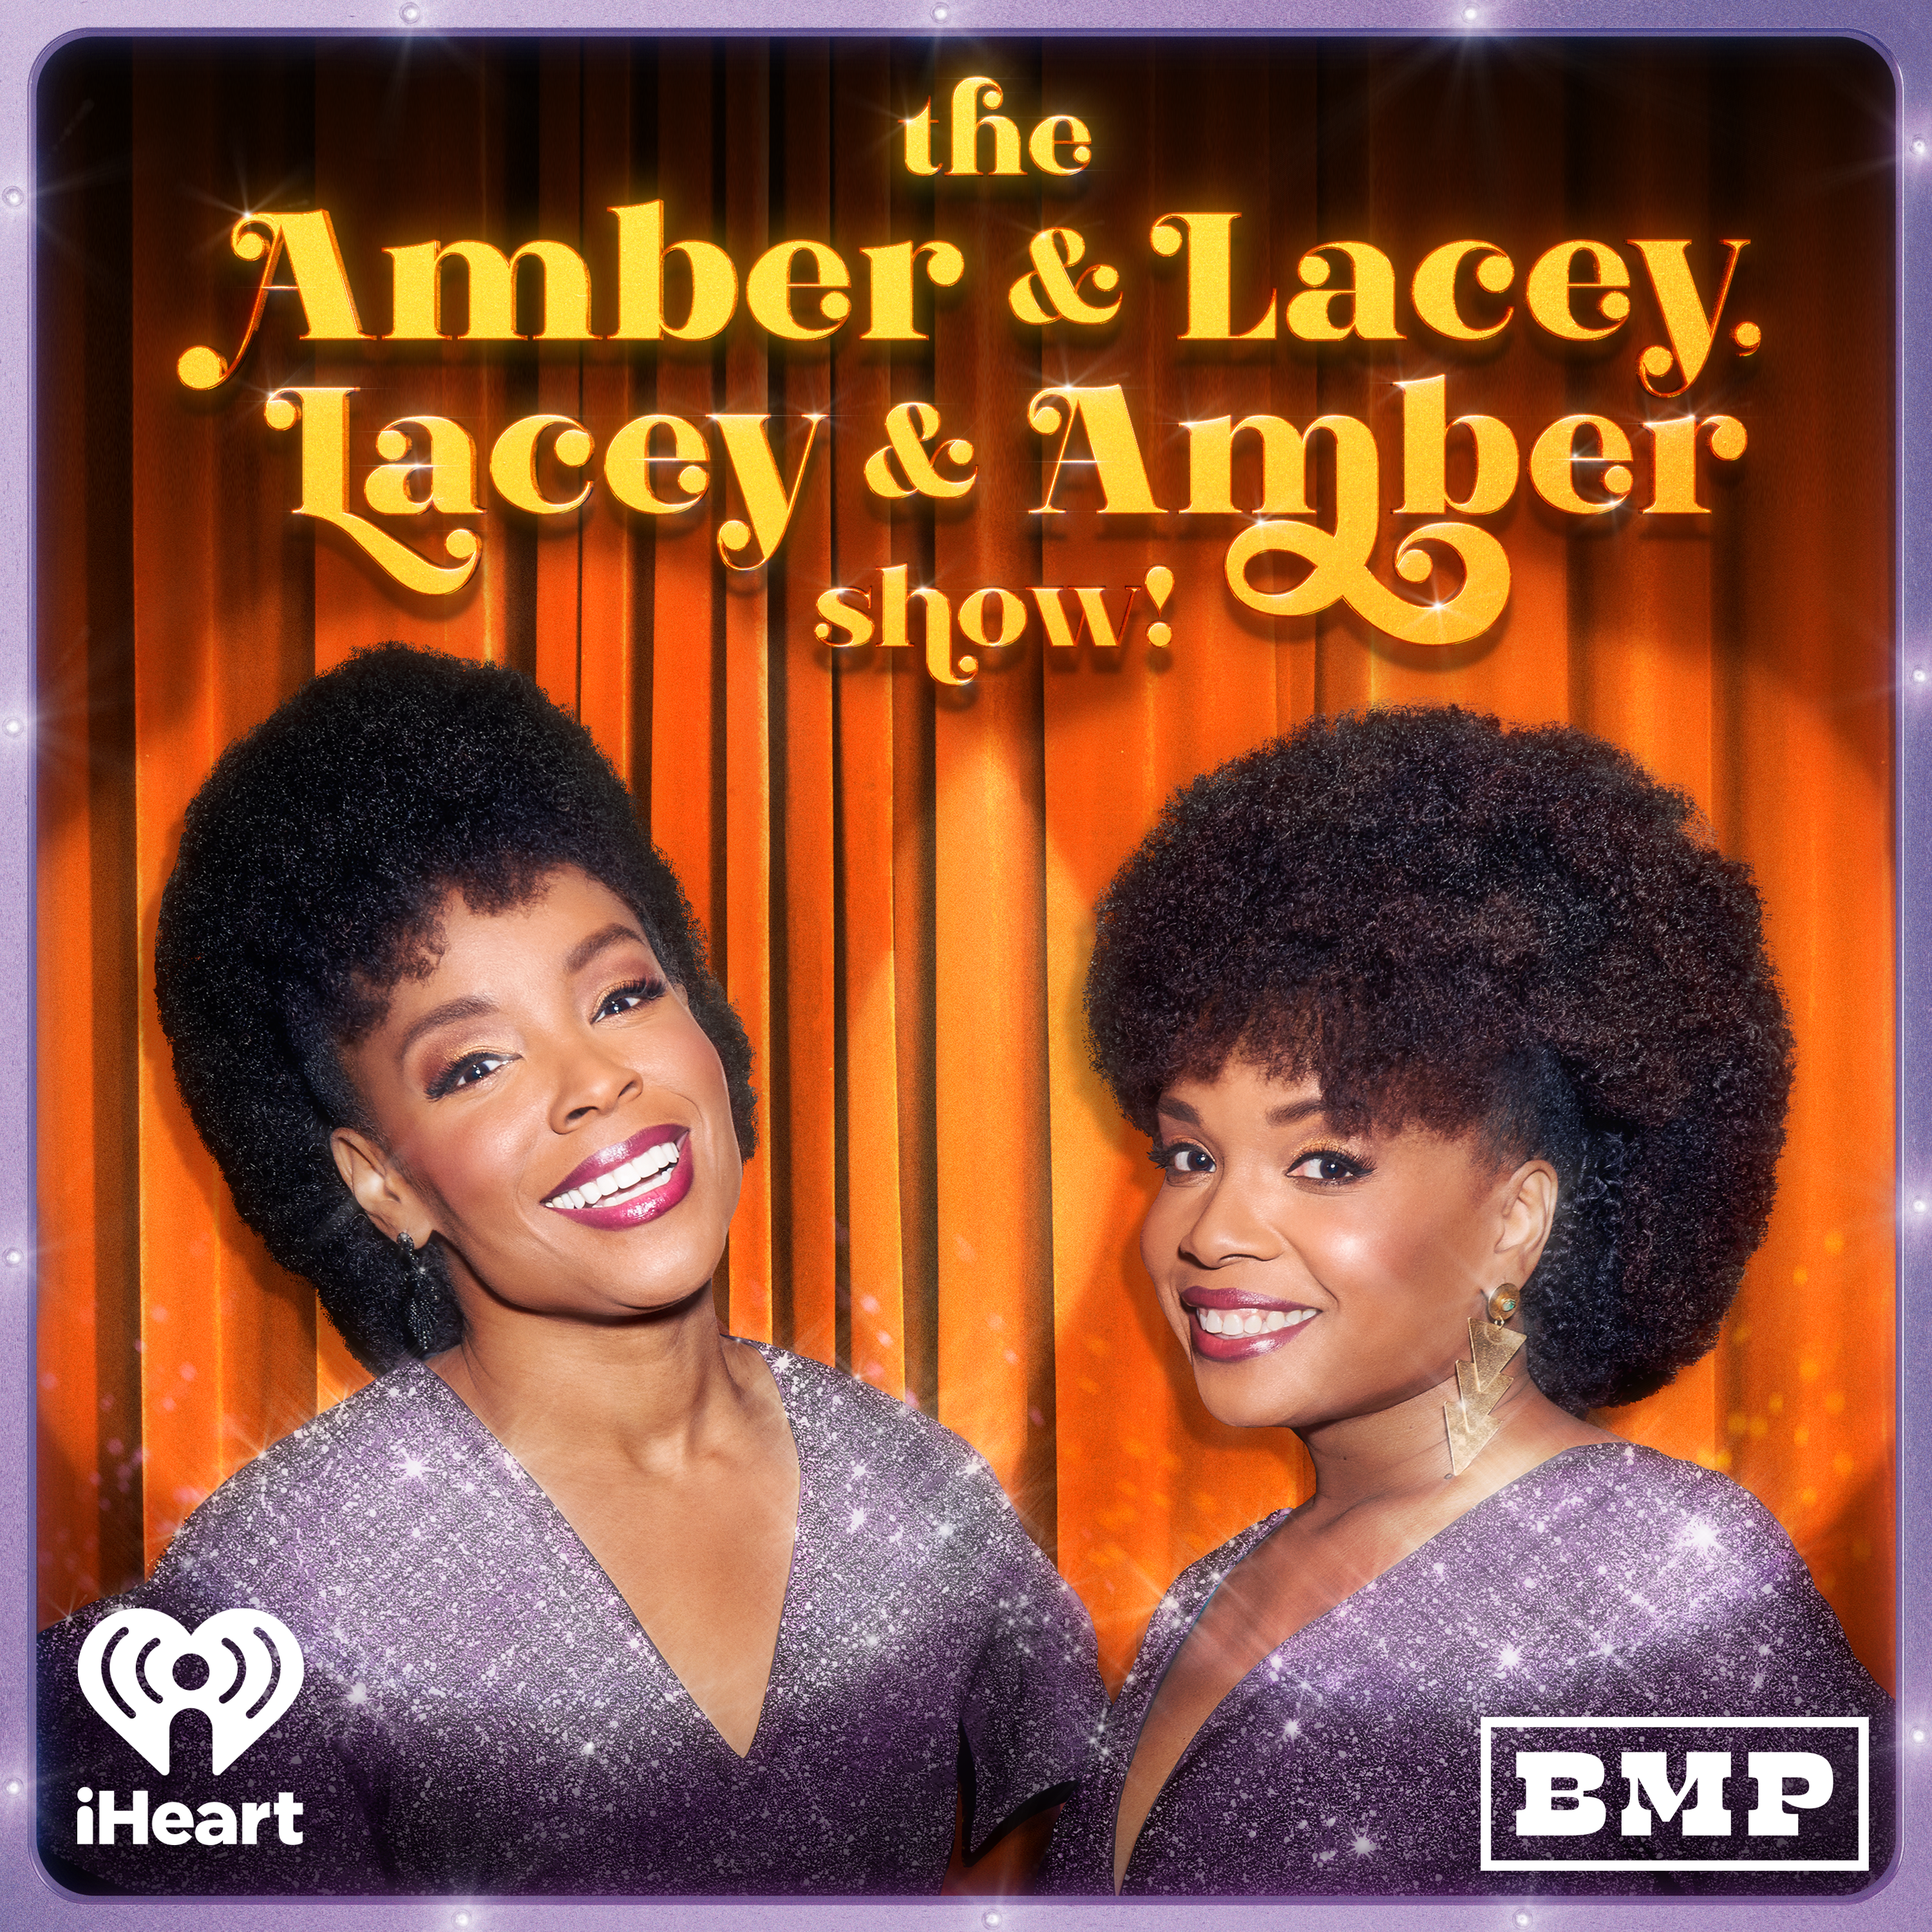 Why Do These Things Happen To Lacey?: This Week's Unbelievable Story From Amber Ruffin & Lacey Lamar